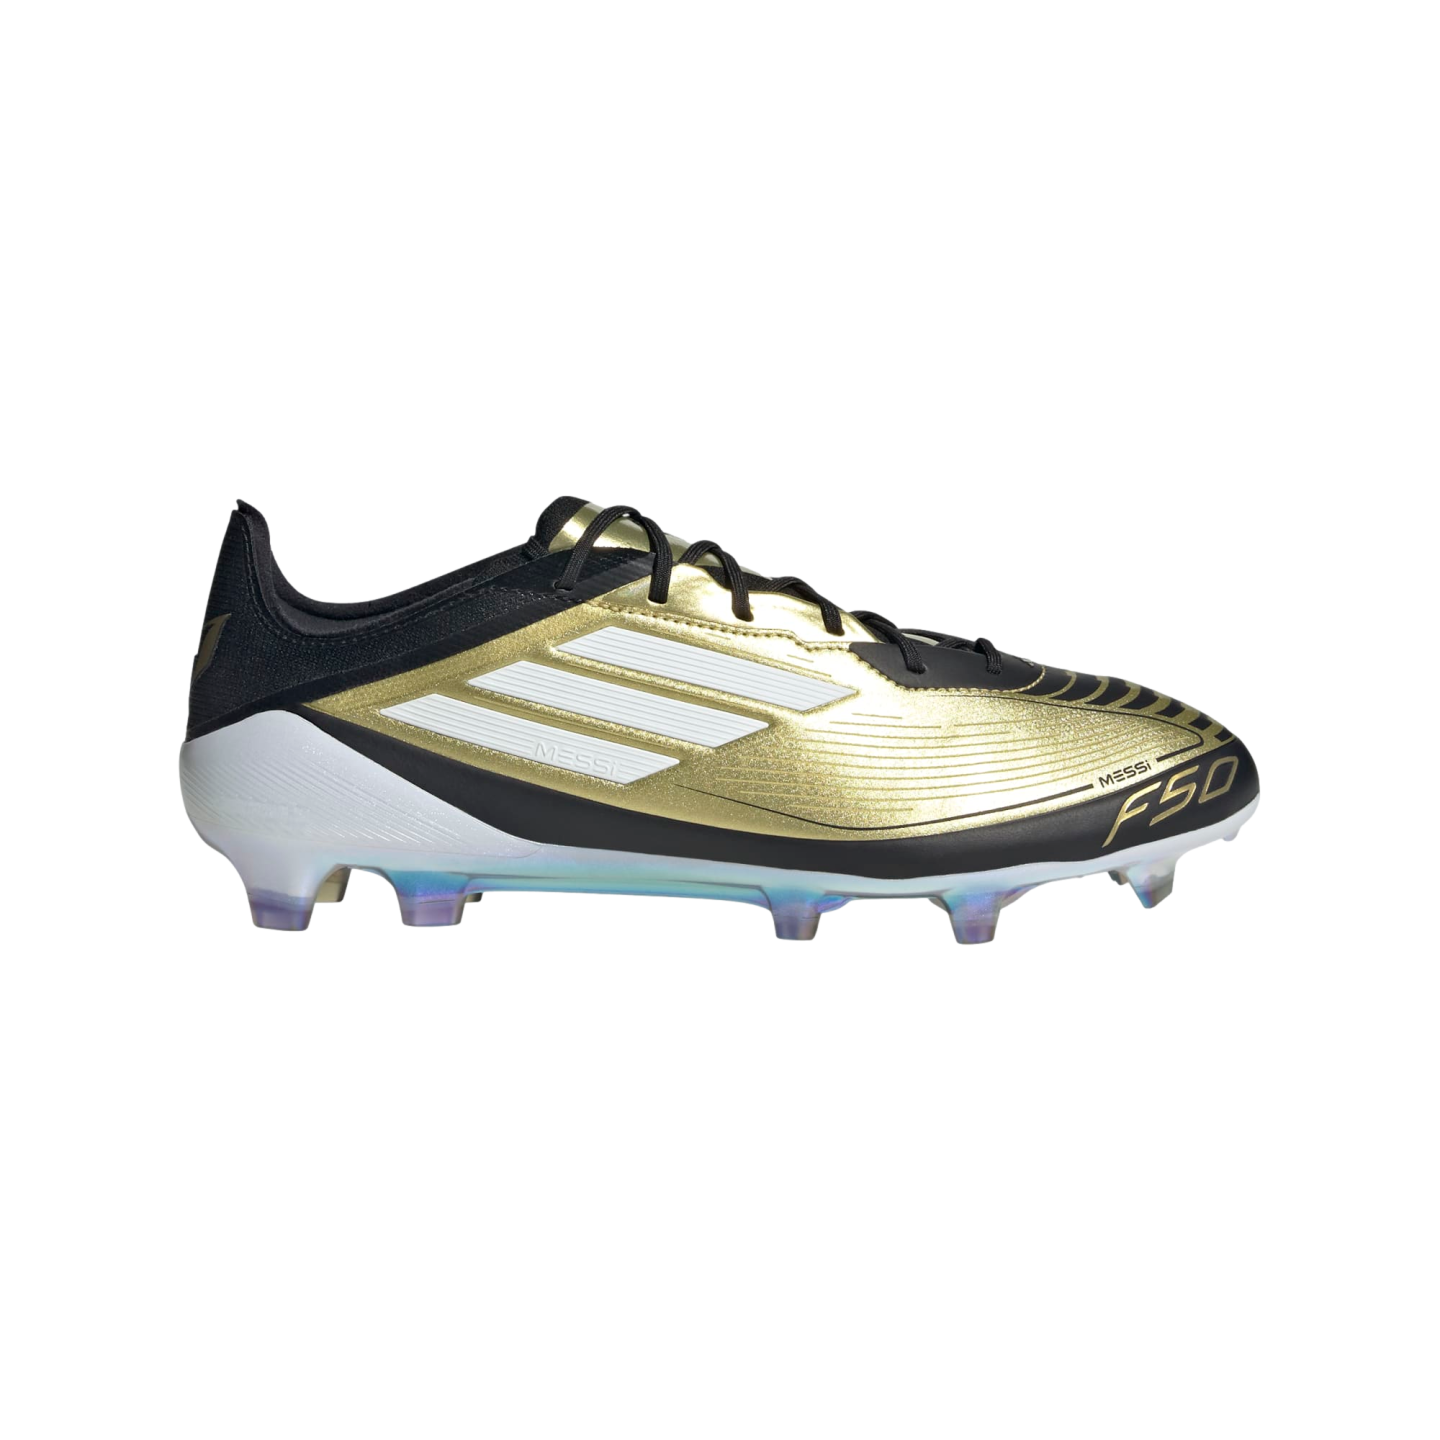 Adidas F50 Elite Messi Firm Ground Cleats